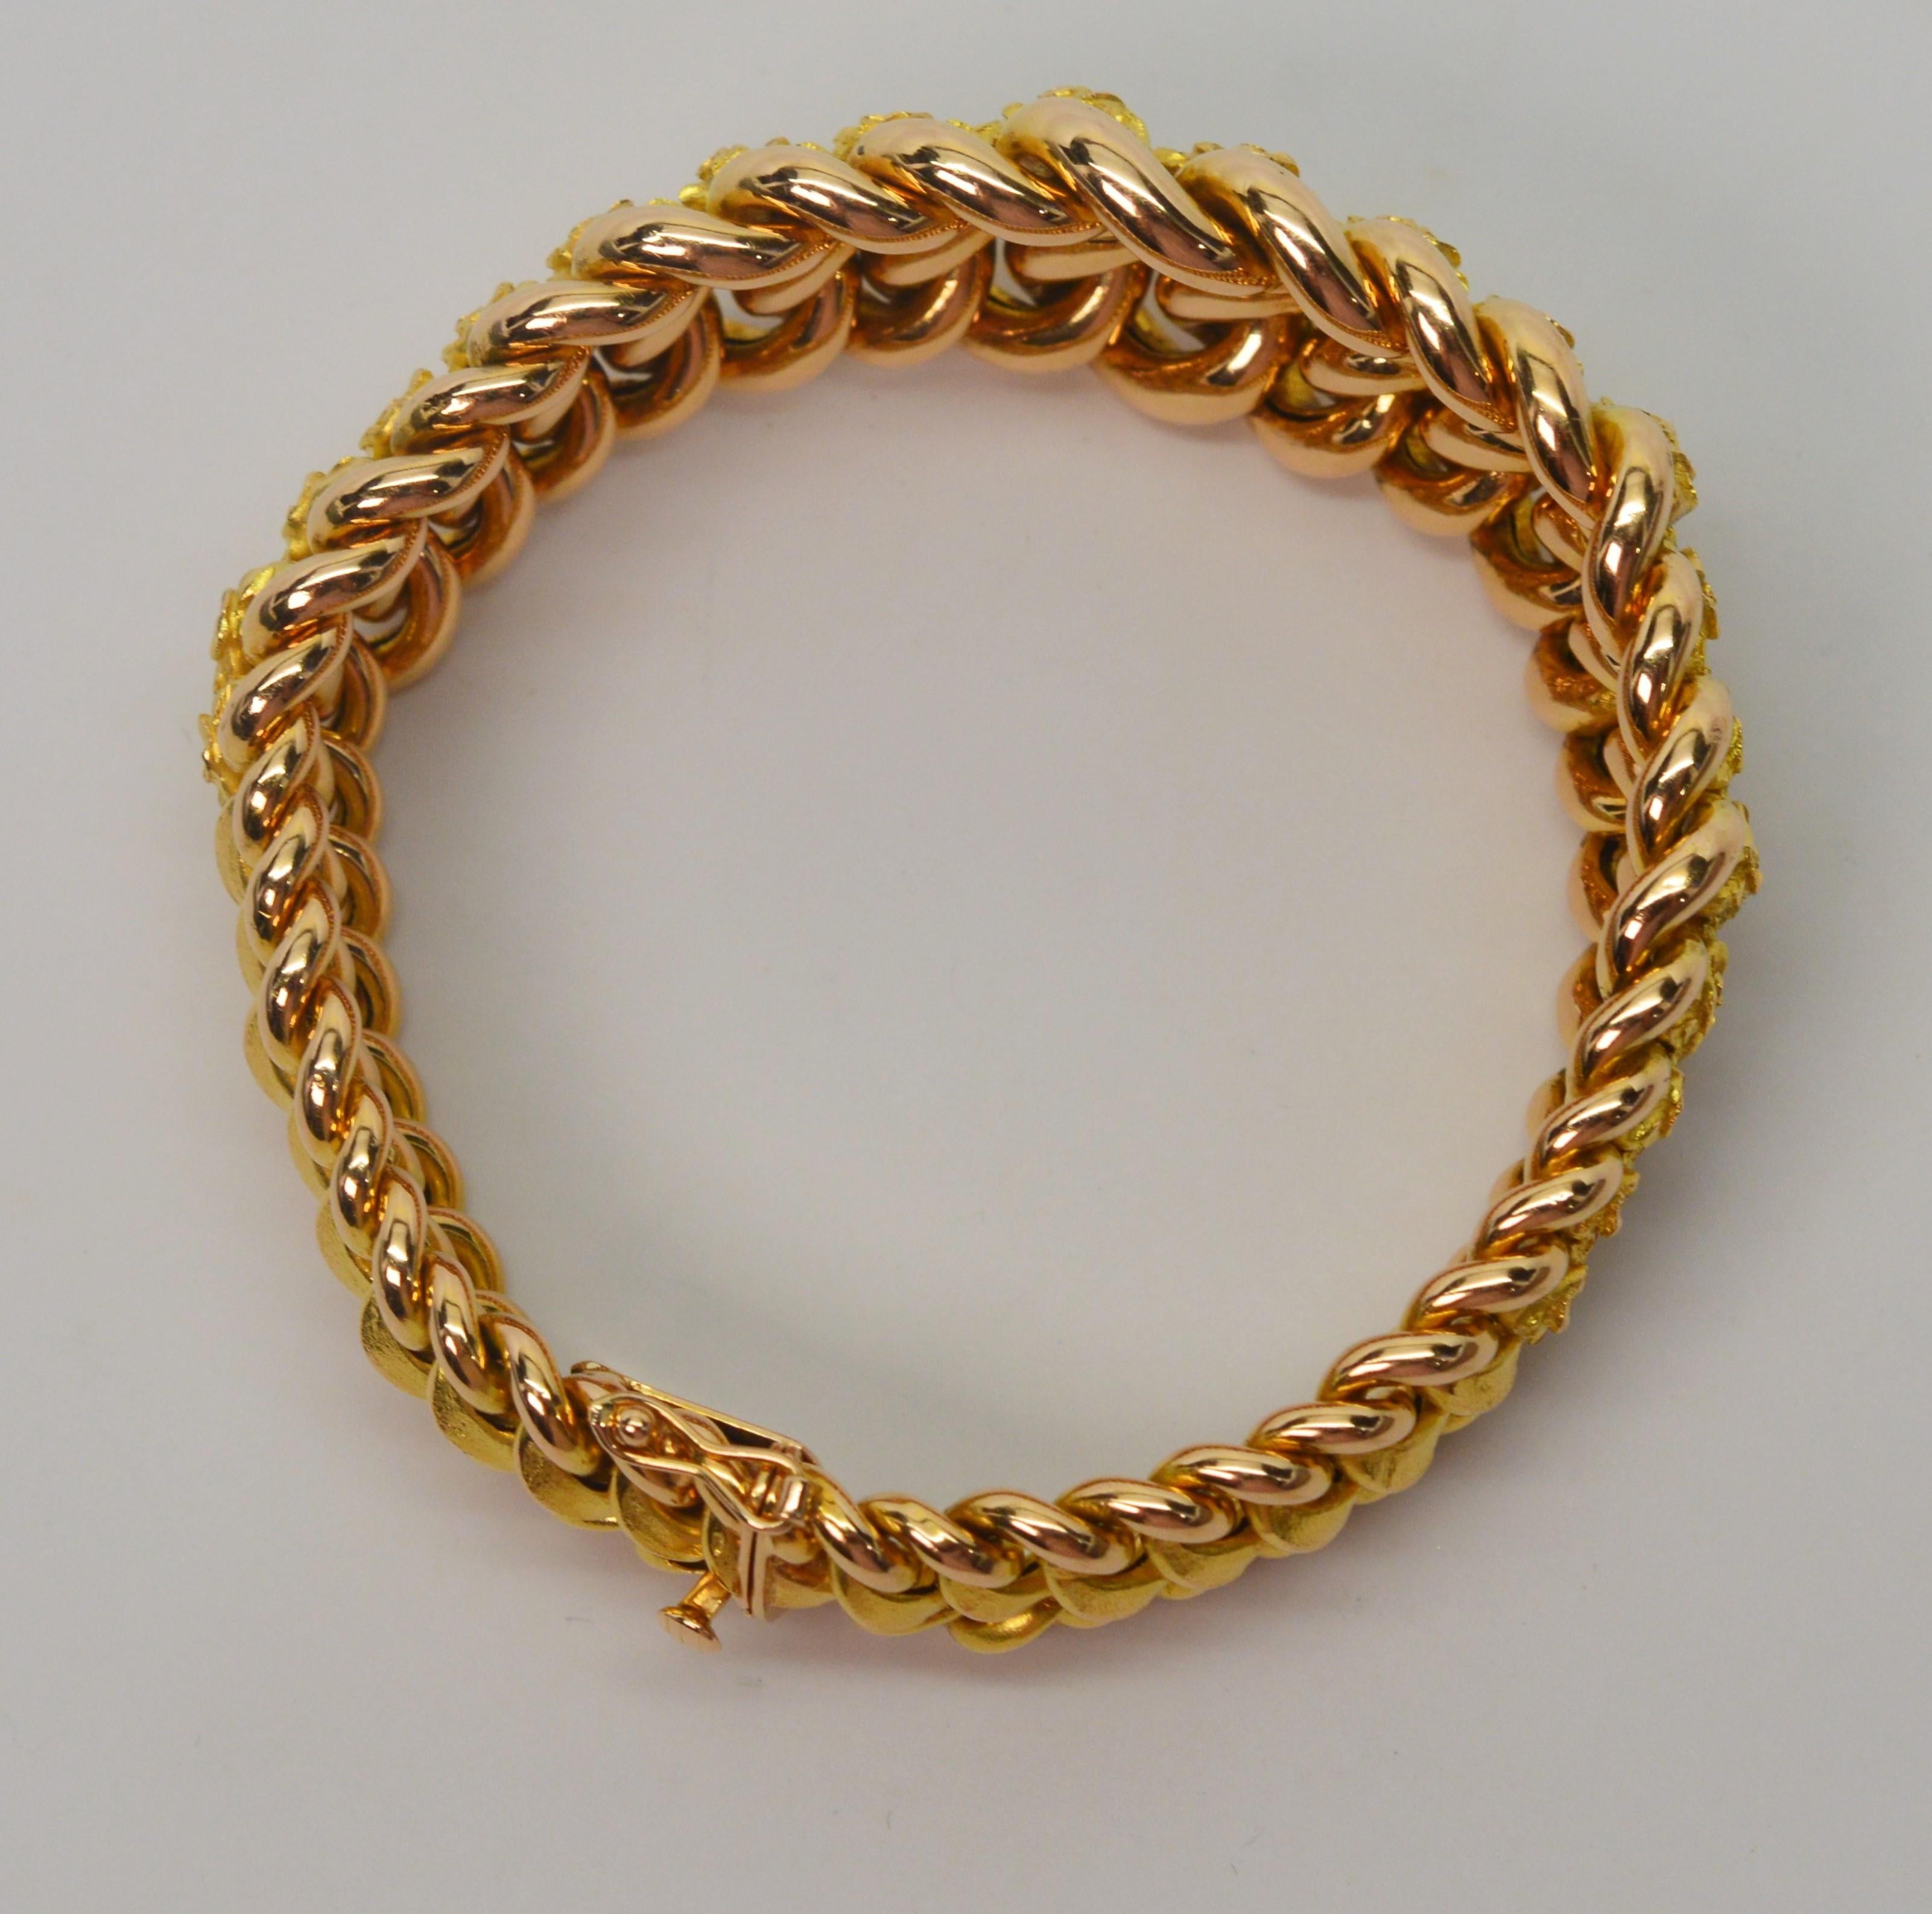 Italian 18 Karat Yellow Gold Floral Braided Link Chain Bracelet For Sale 1